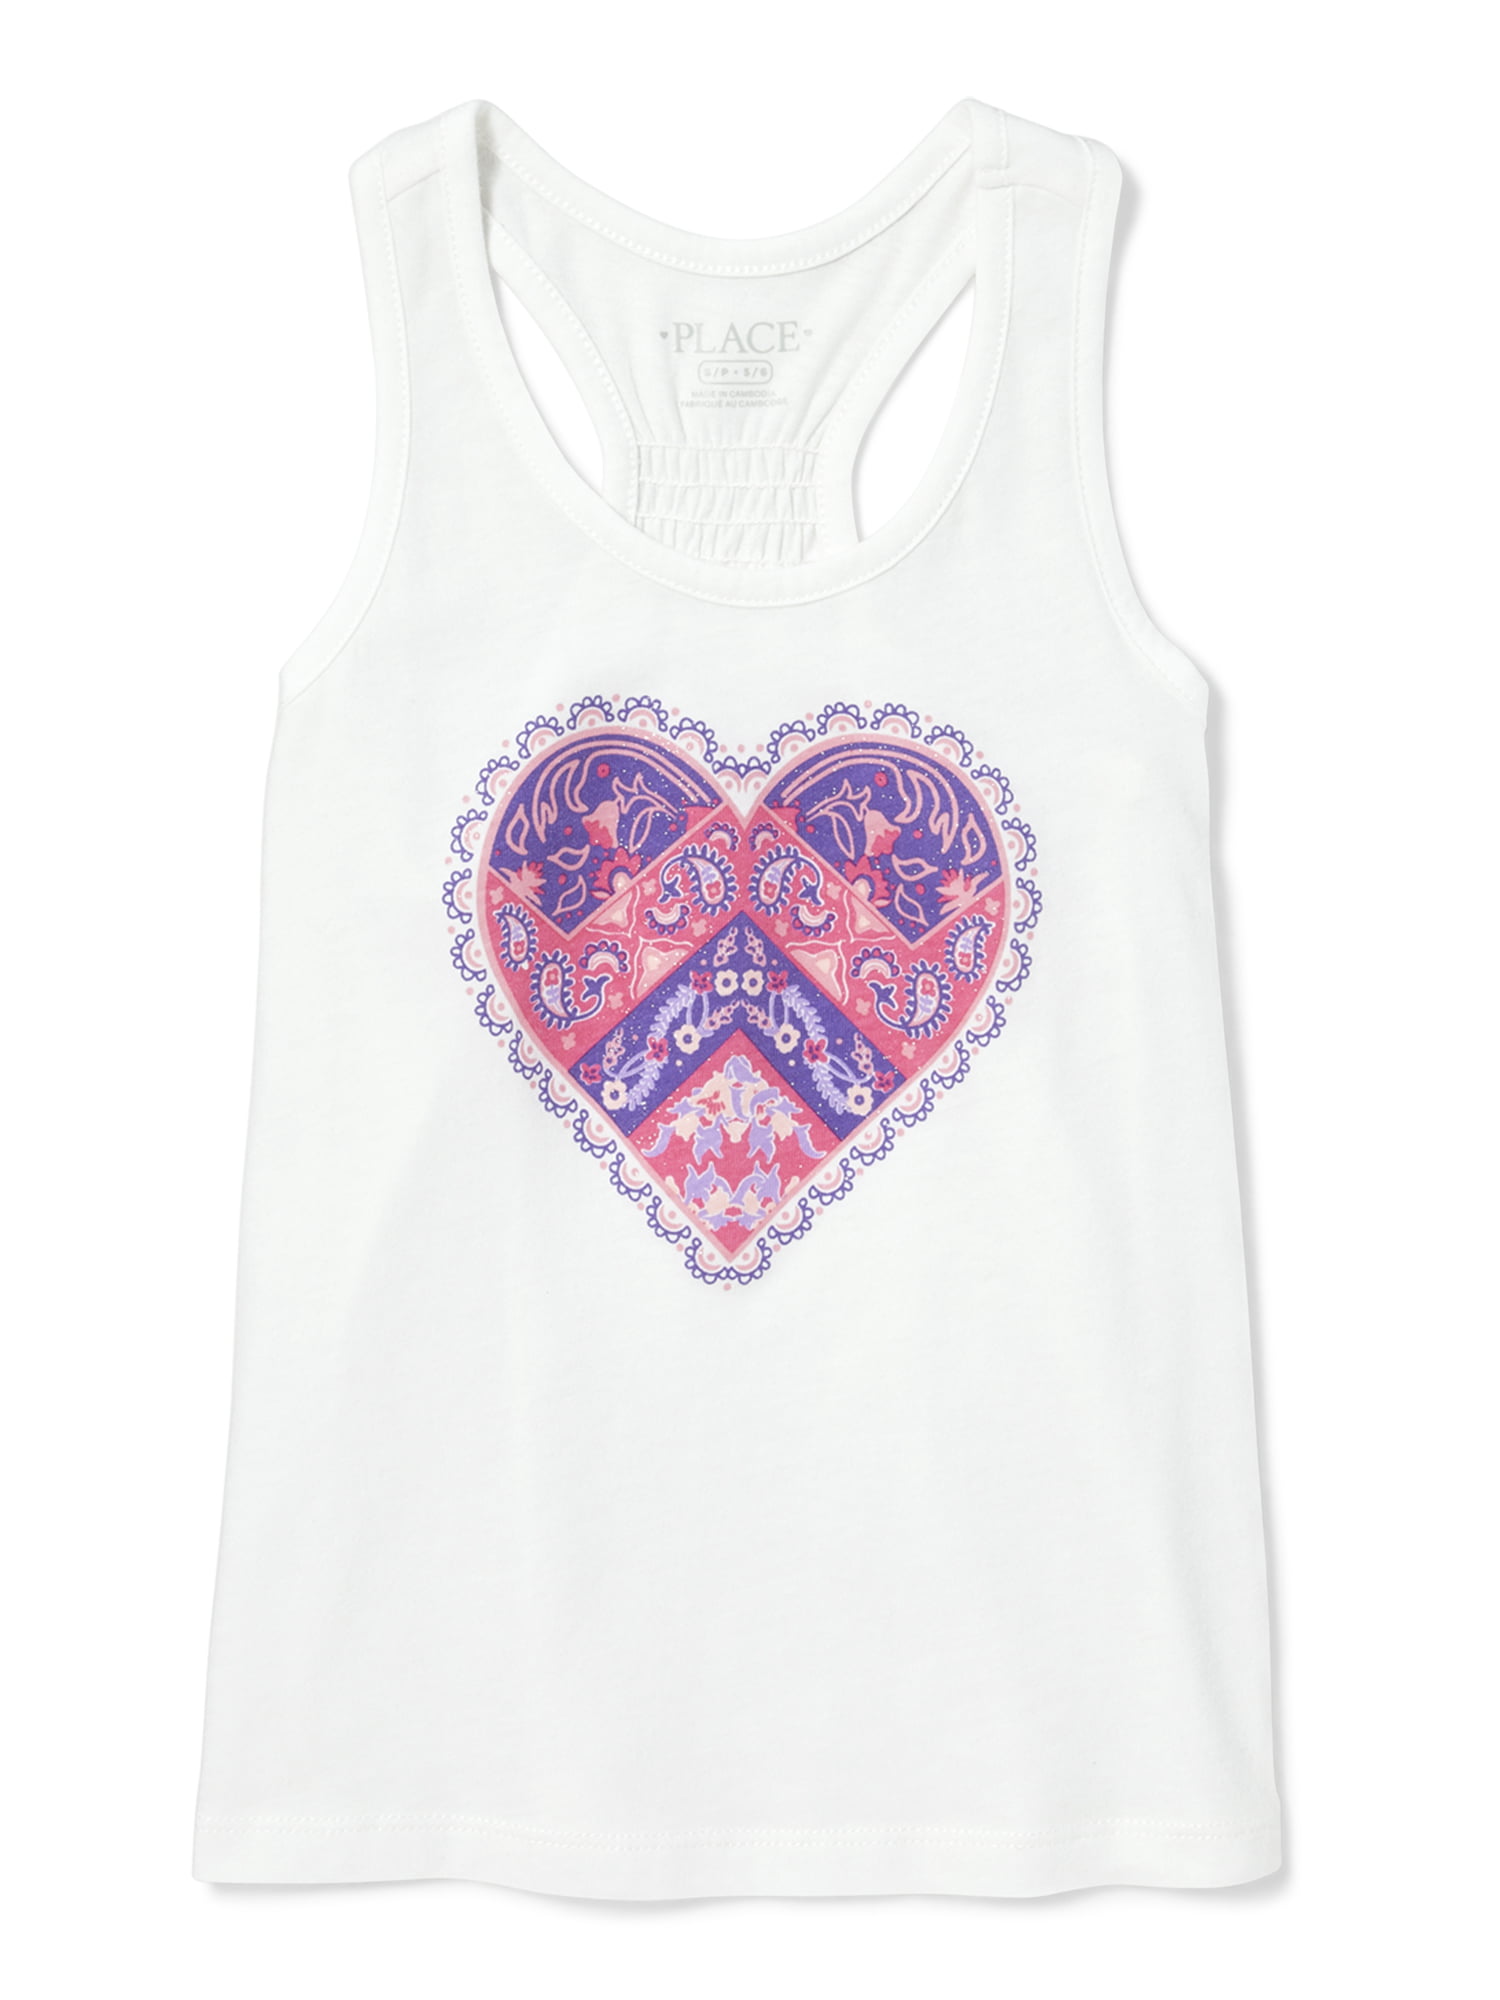 The Childrens Place Girls Graphic Tank Top 